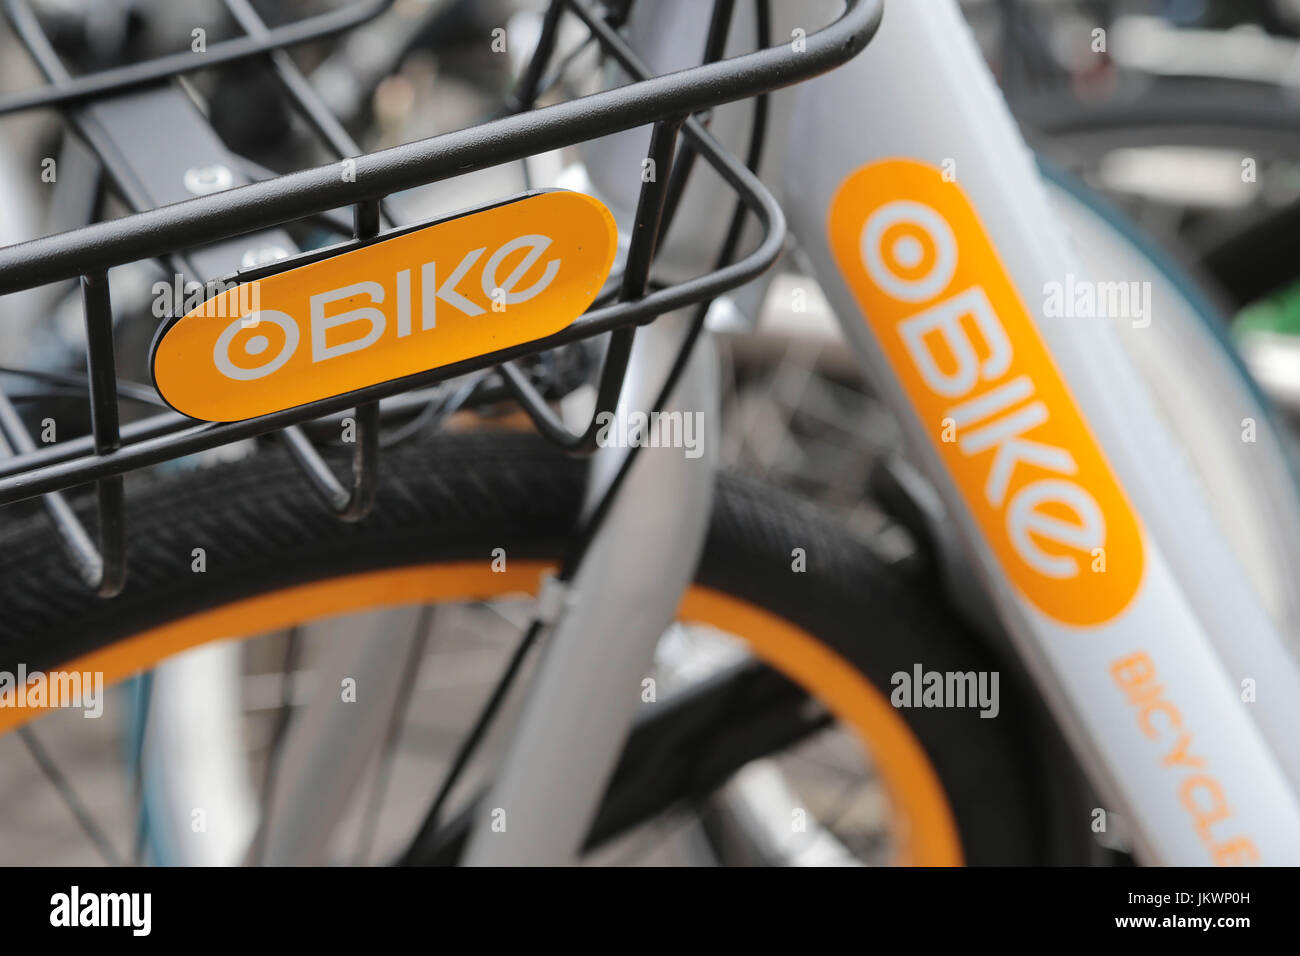 A new bicycle hire scheme to rival Boris Bikes has launched in London. The start-up firm from Singapore has become the first ‘dockless’ bicycle hire. Stock Photo